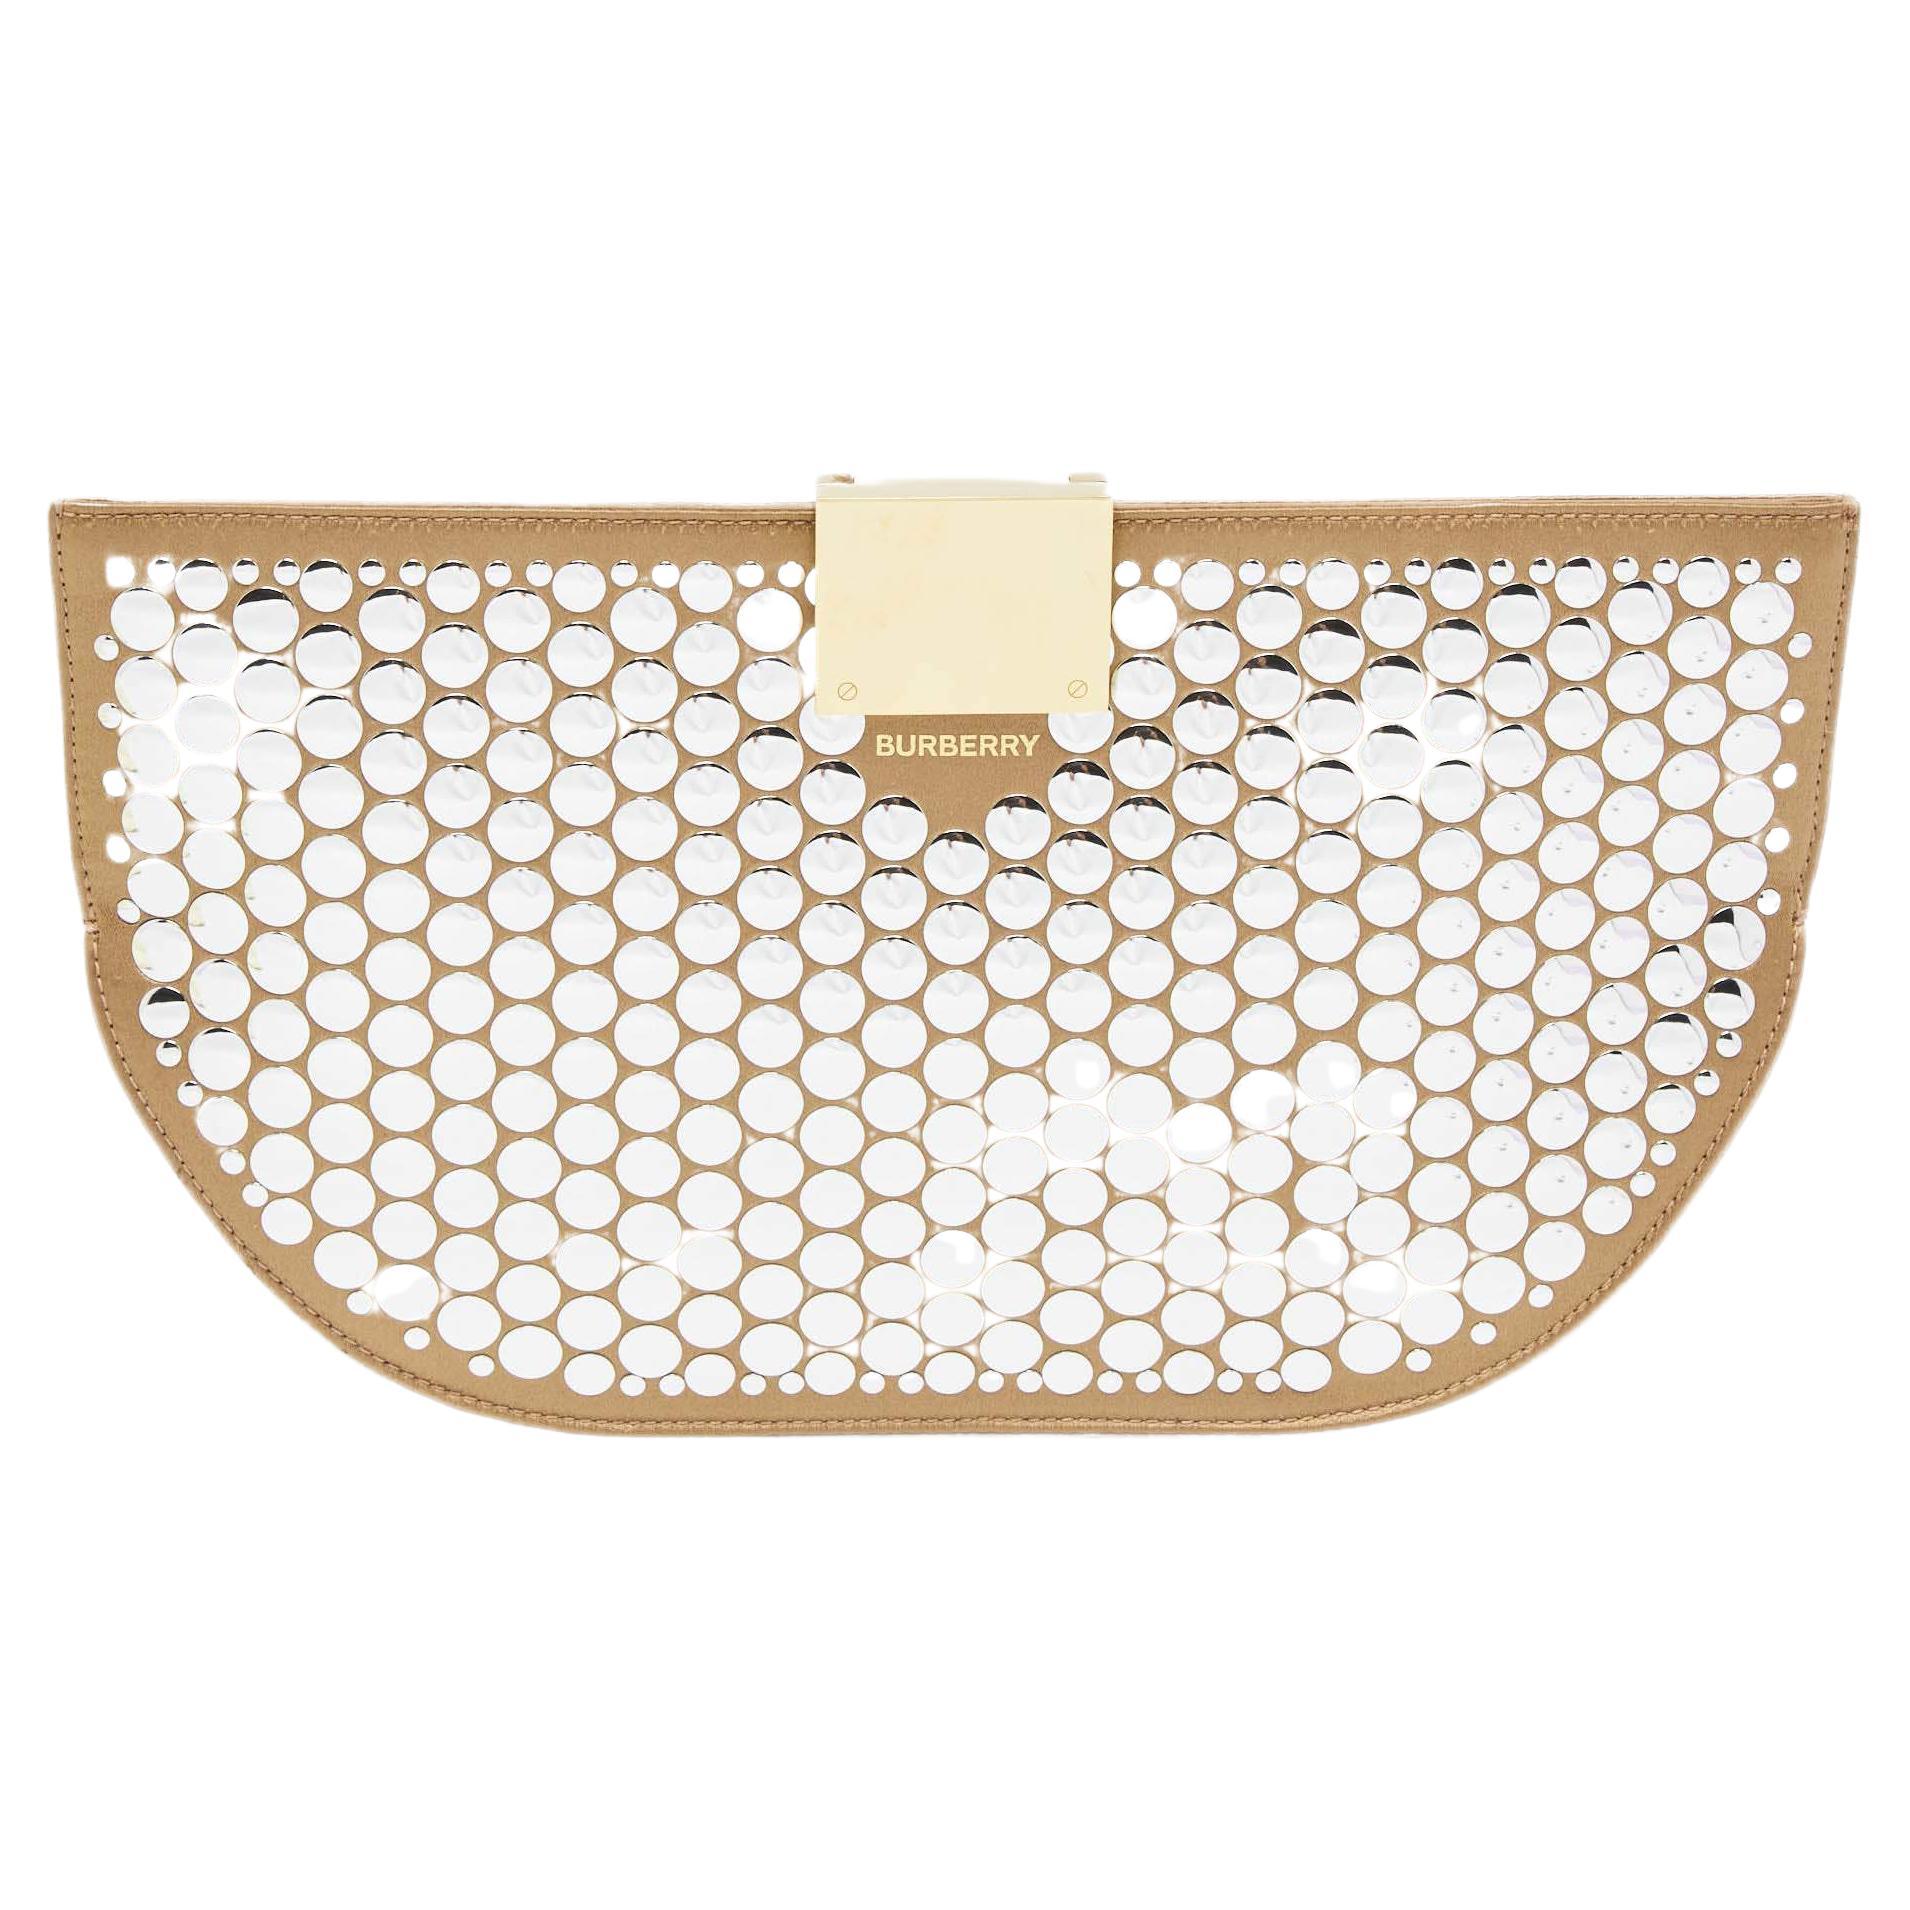 Burberry Beige Satin and Leather Olympia Studded Clutch